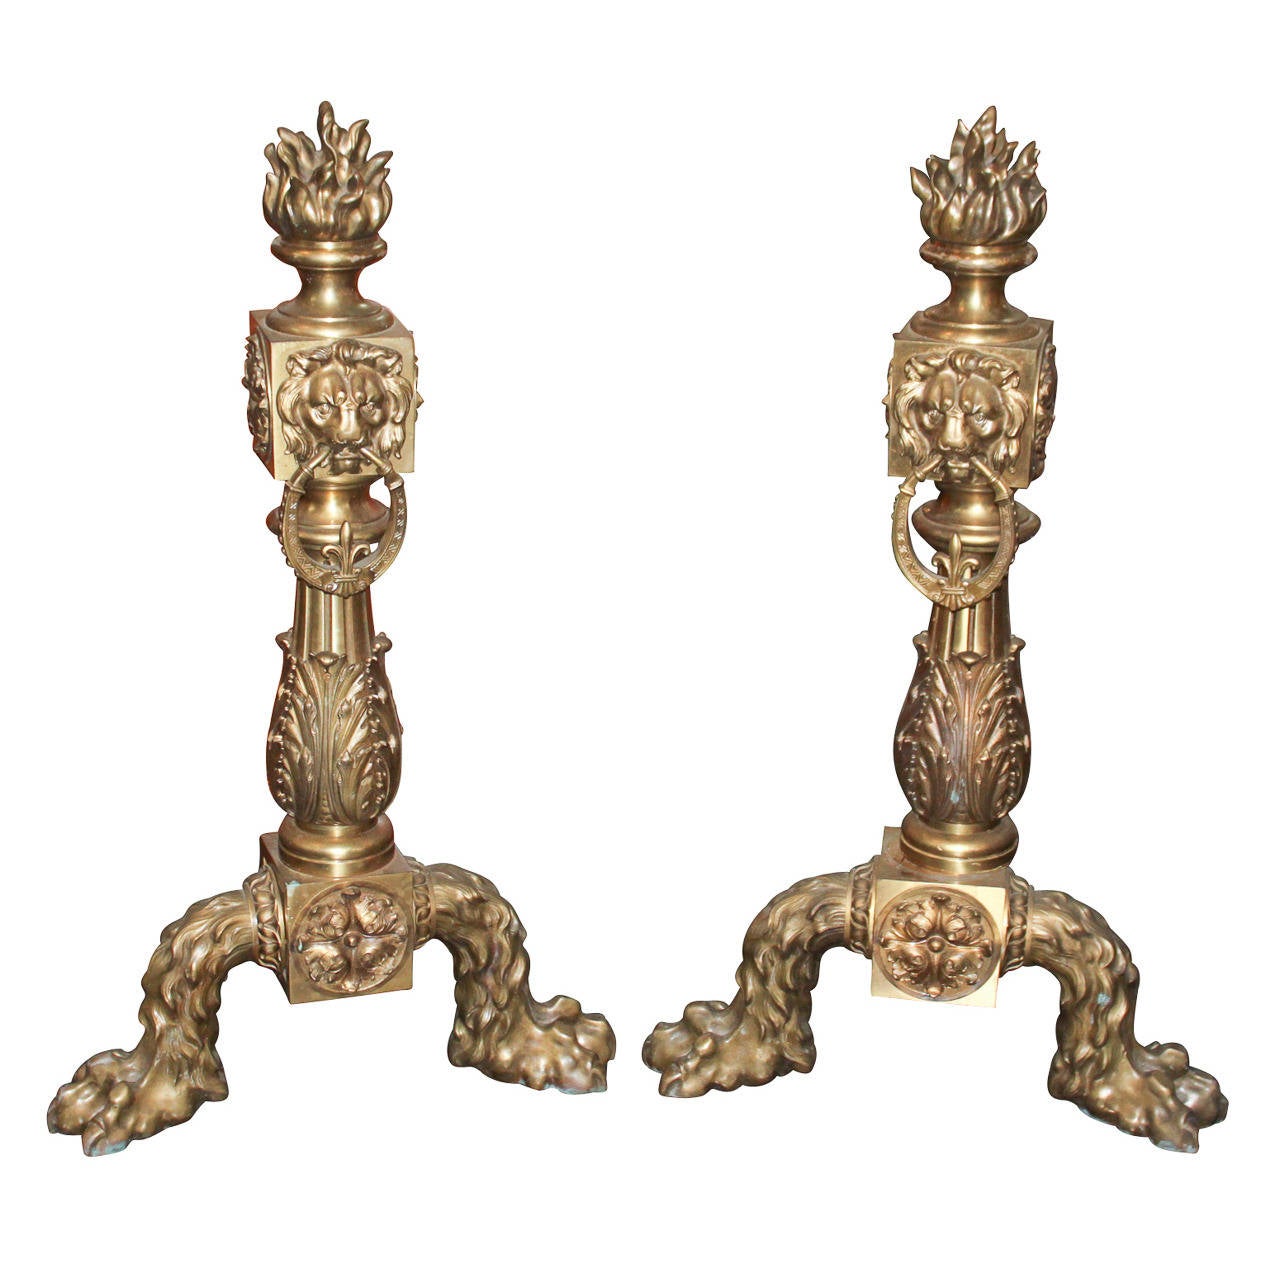 Impressive monumental pair of French heavy gilt bronze andirons. Having wonderful casting, two-legged claw foot base, acanthus leaf and rosette motifs, lion masks and topped with flame finial. A truly sensational pair worthy of many designs!